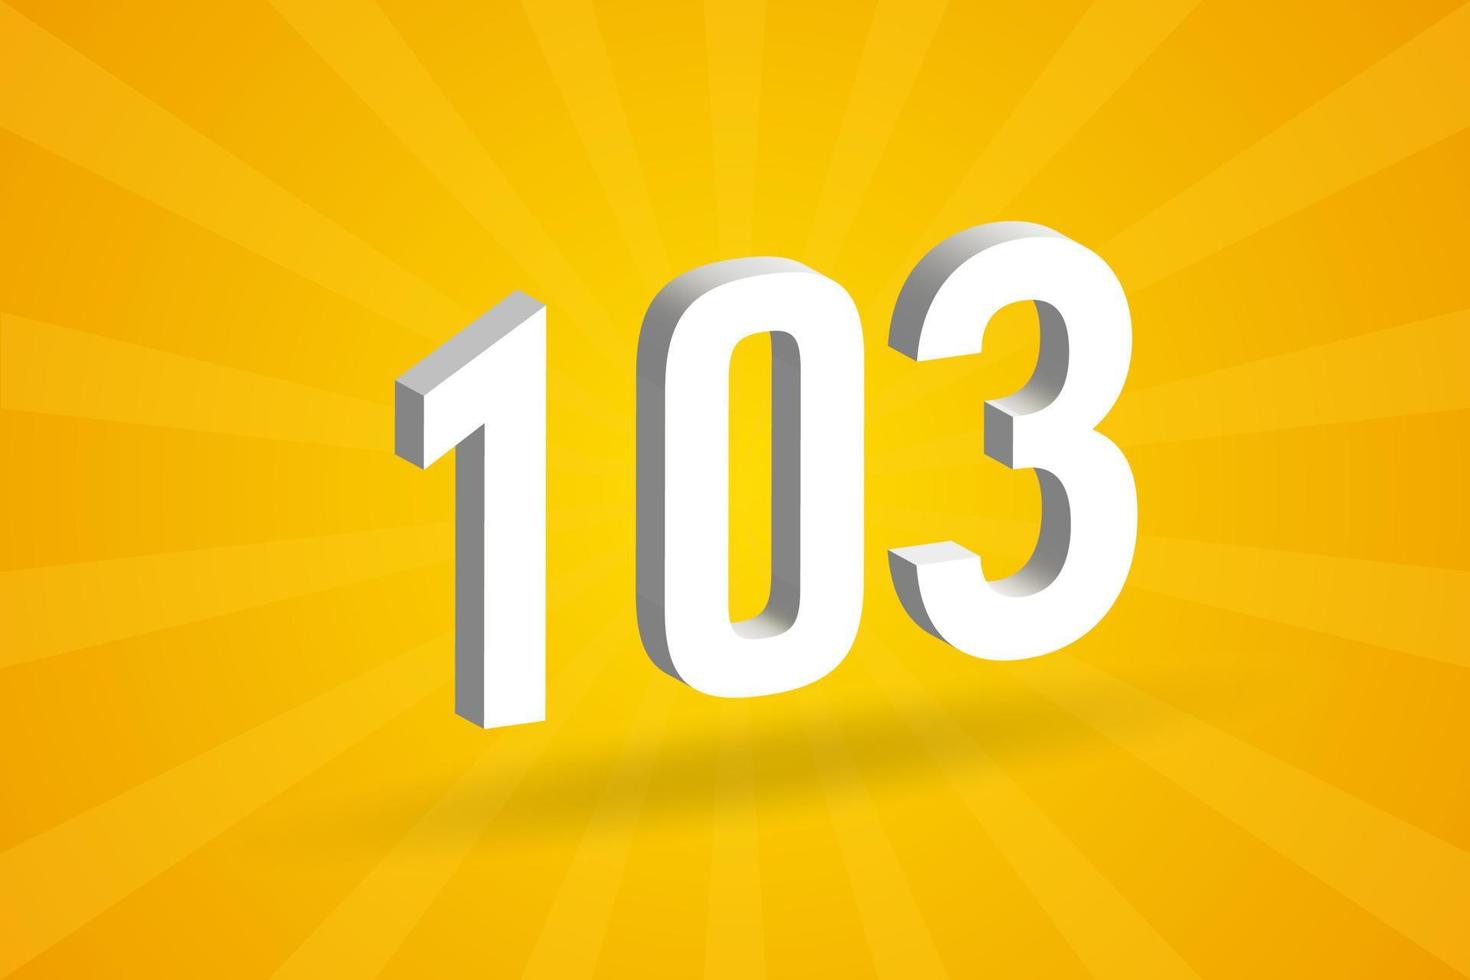 3D 103 number font alphabet. White 3D Number 103 with yellow background vector